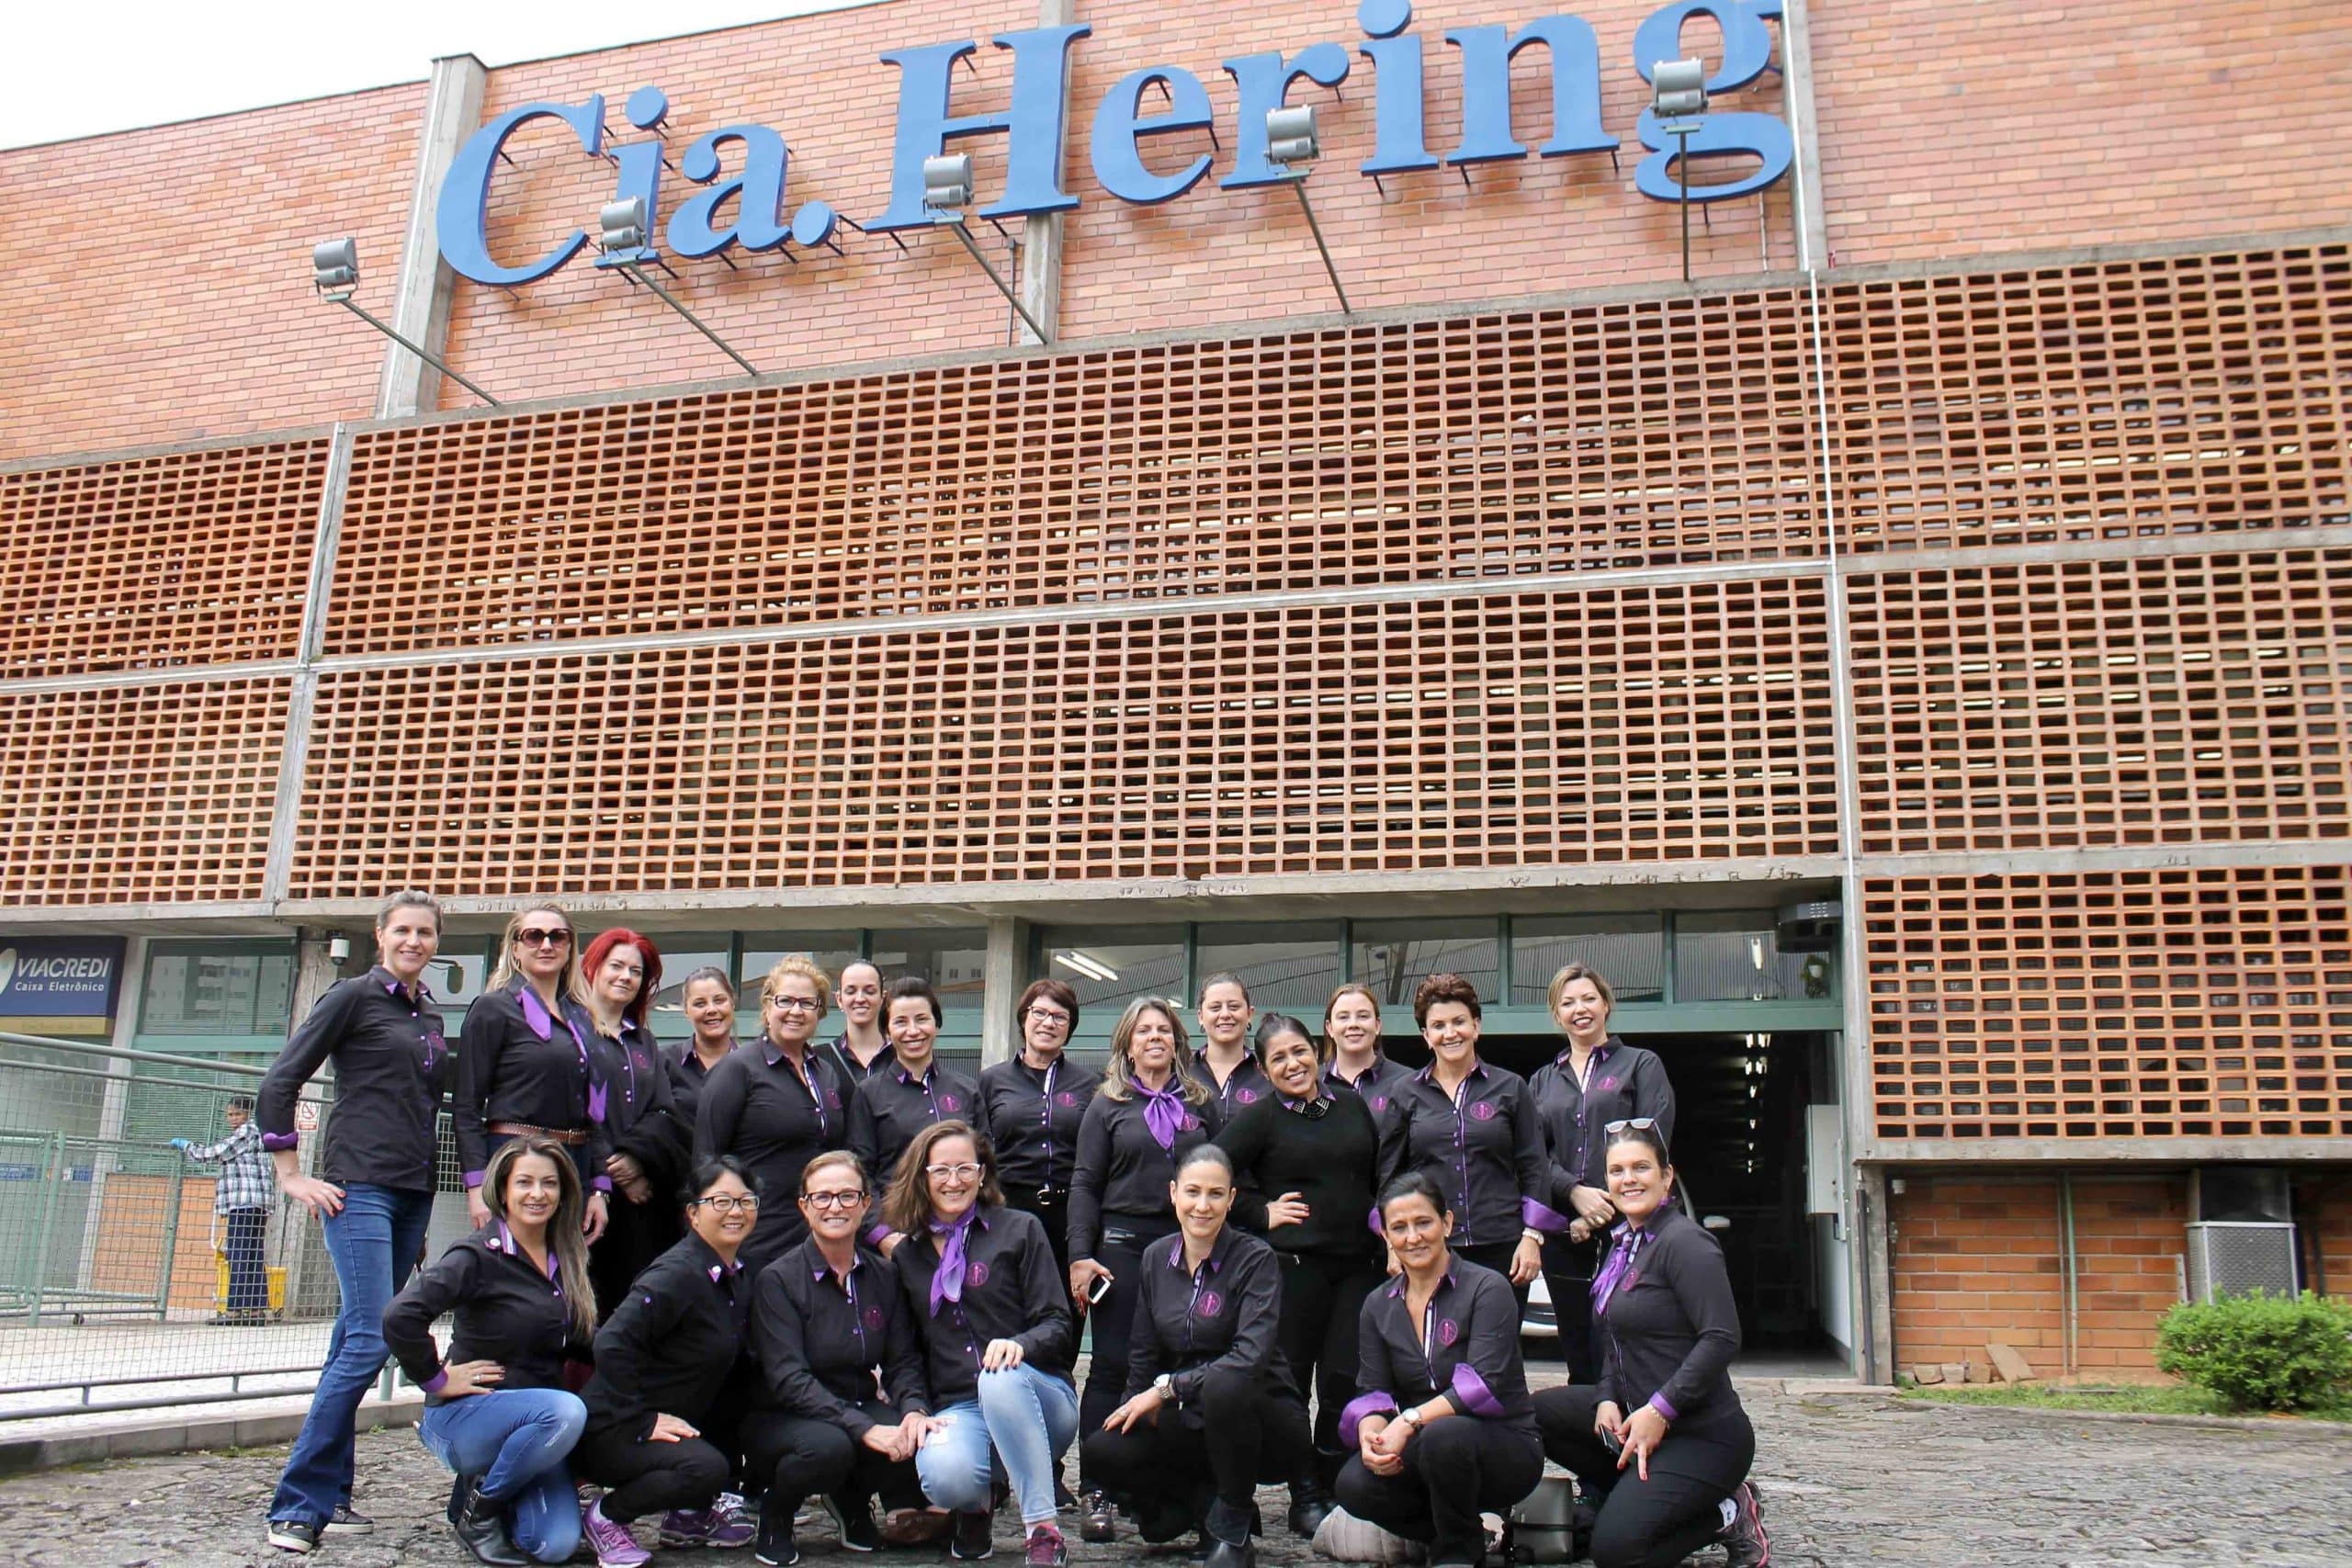 CIA Hering S.A. - HGTX3